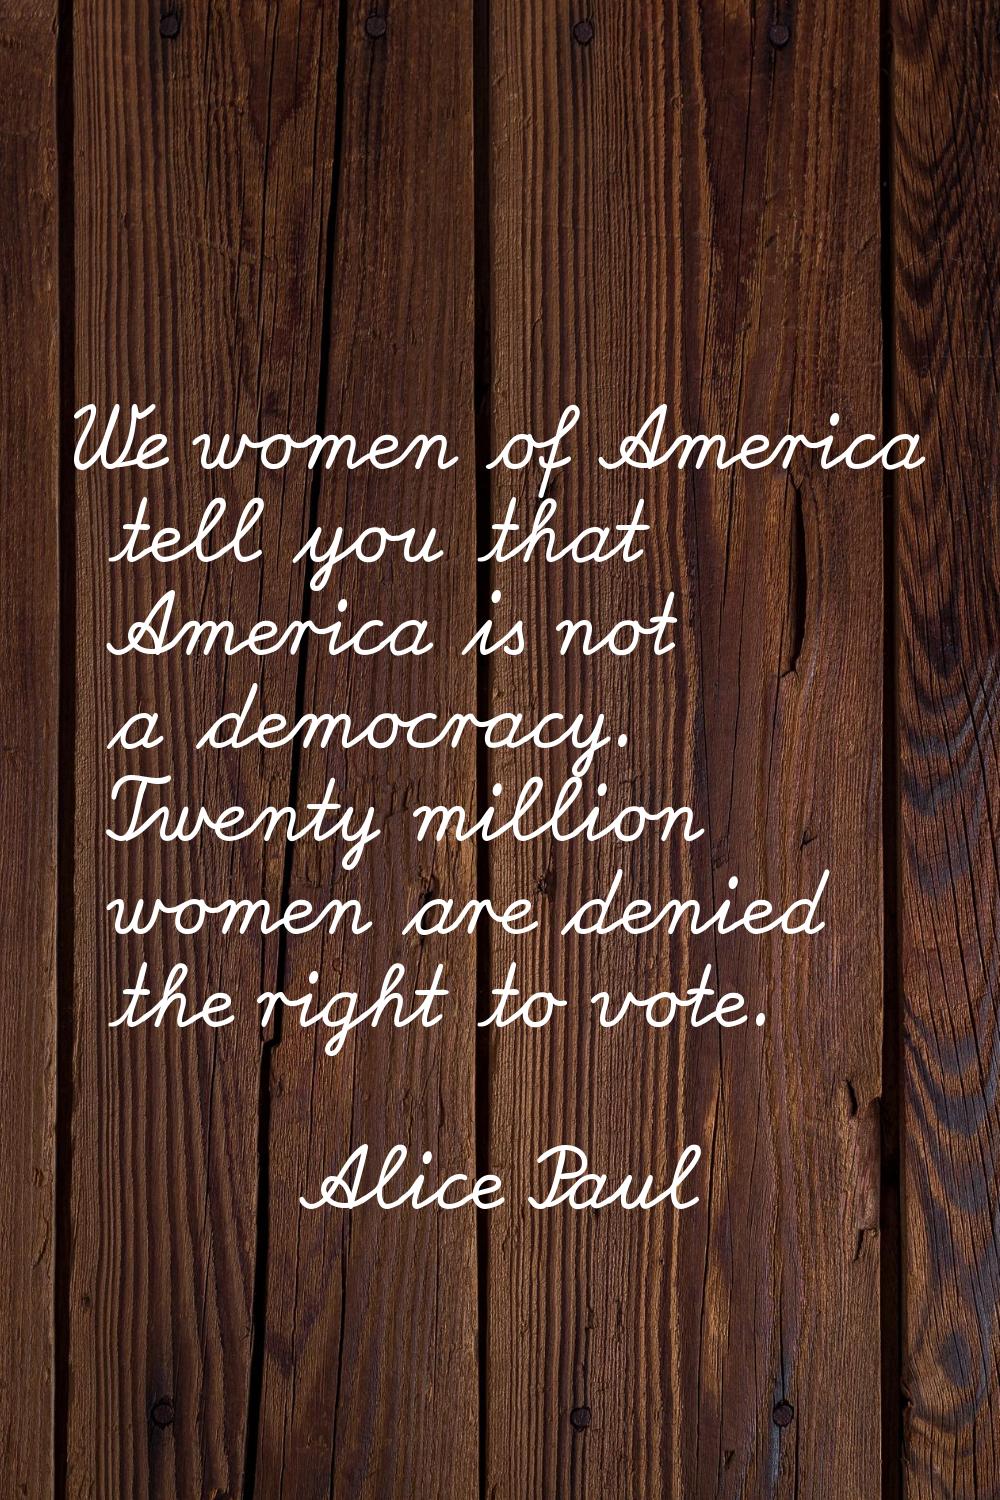 We women of America tell you that America is not a democracy. Twenty million women are denied the r